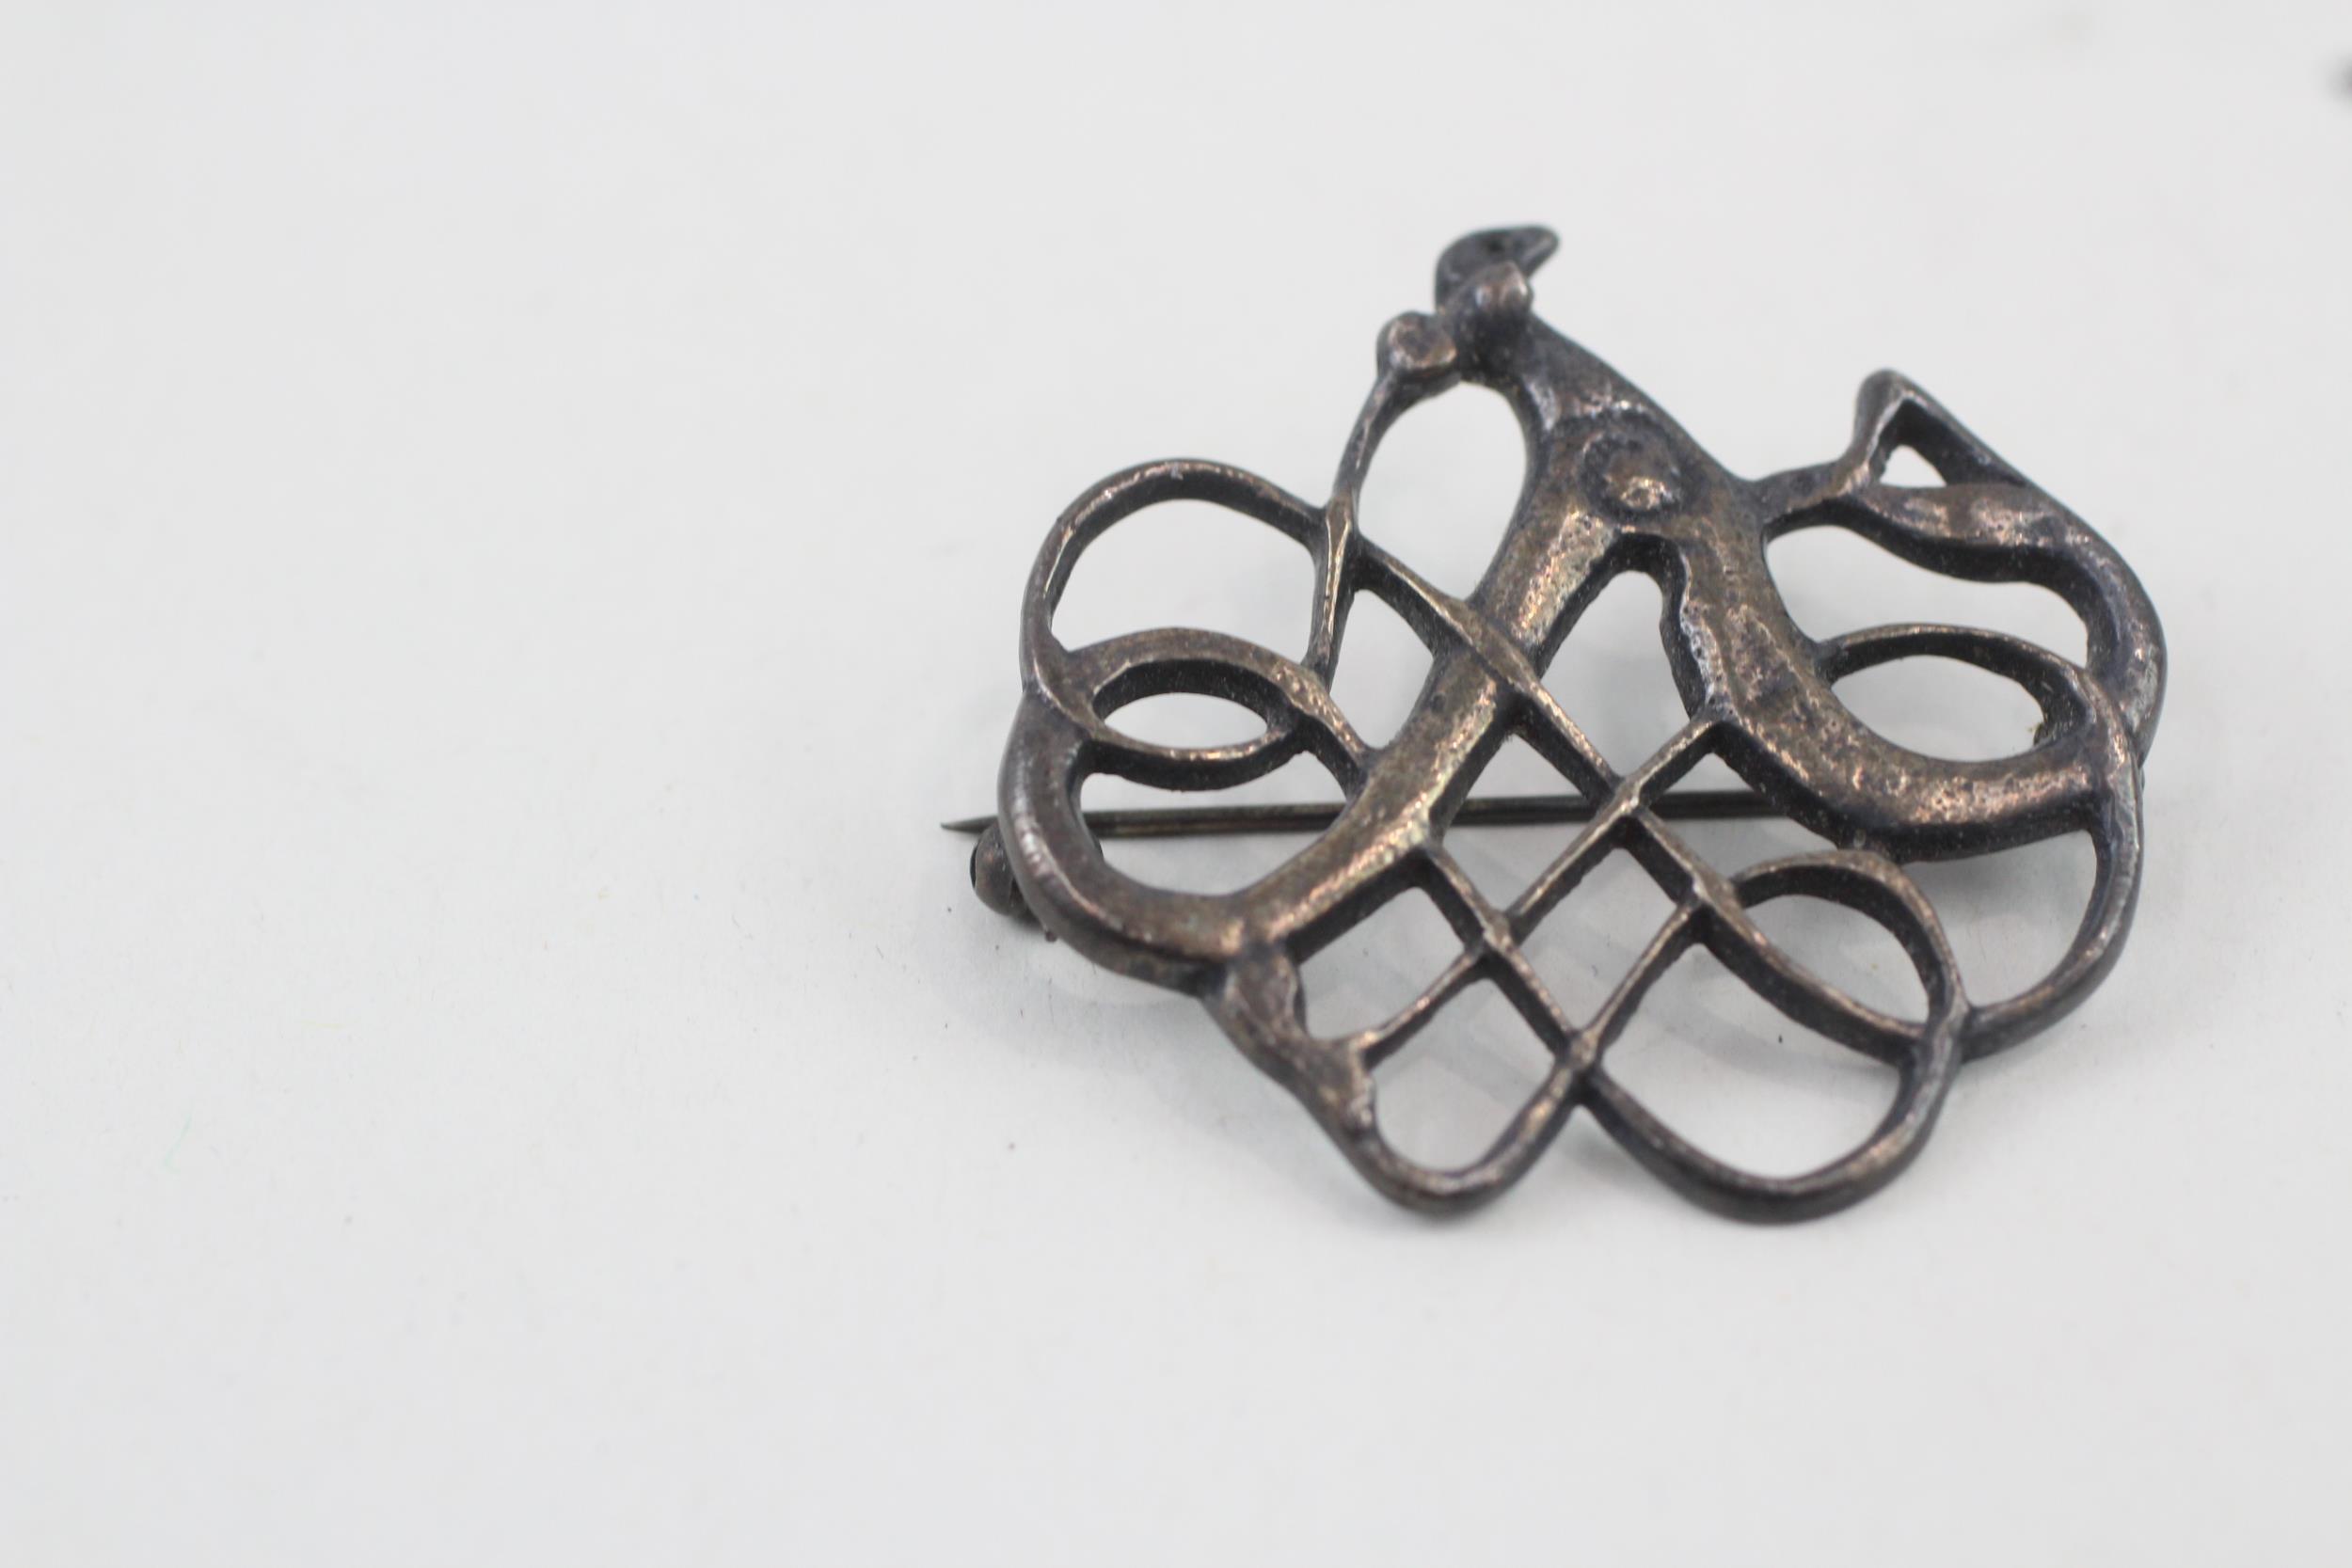 Silver Viking replica brooch by David Anderson (10g) - Image 4 of 6